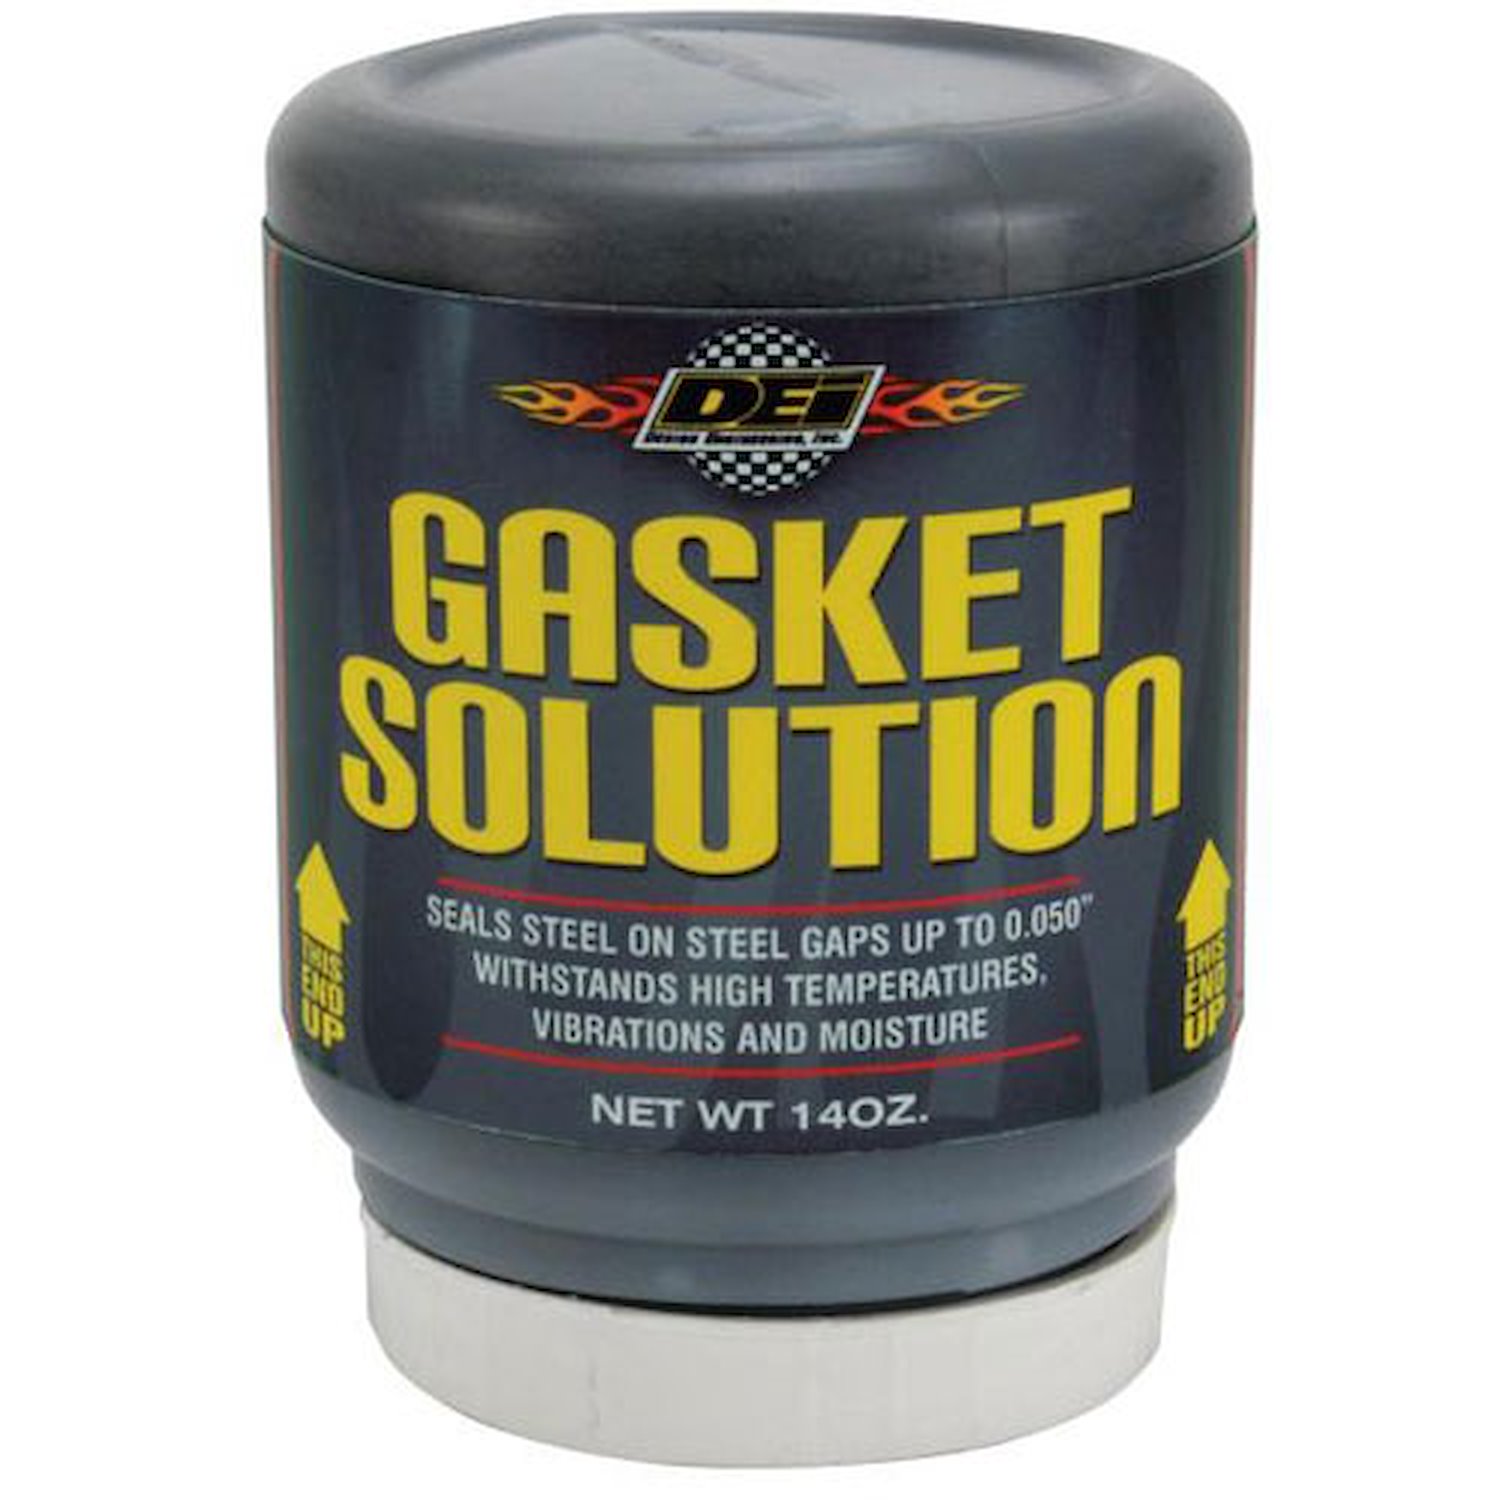 Gasket Solution 14 oz. per container